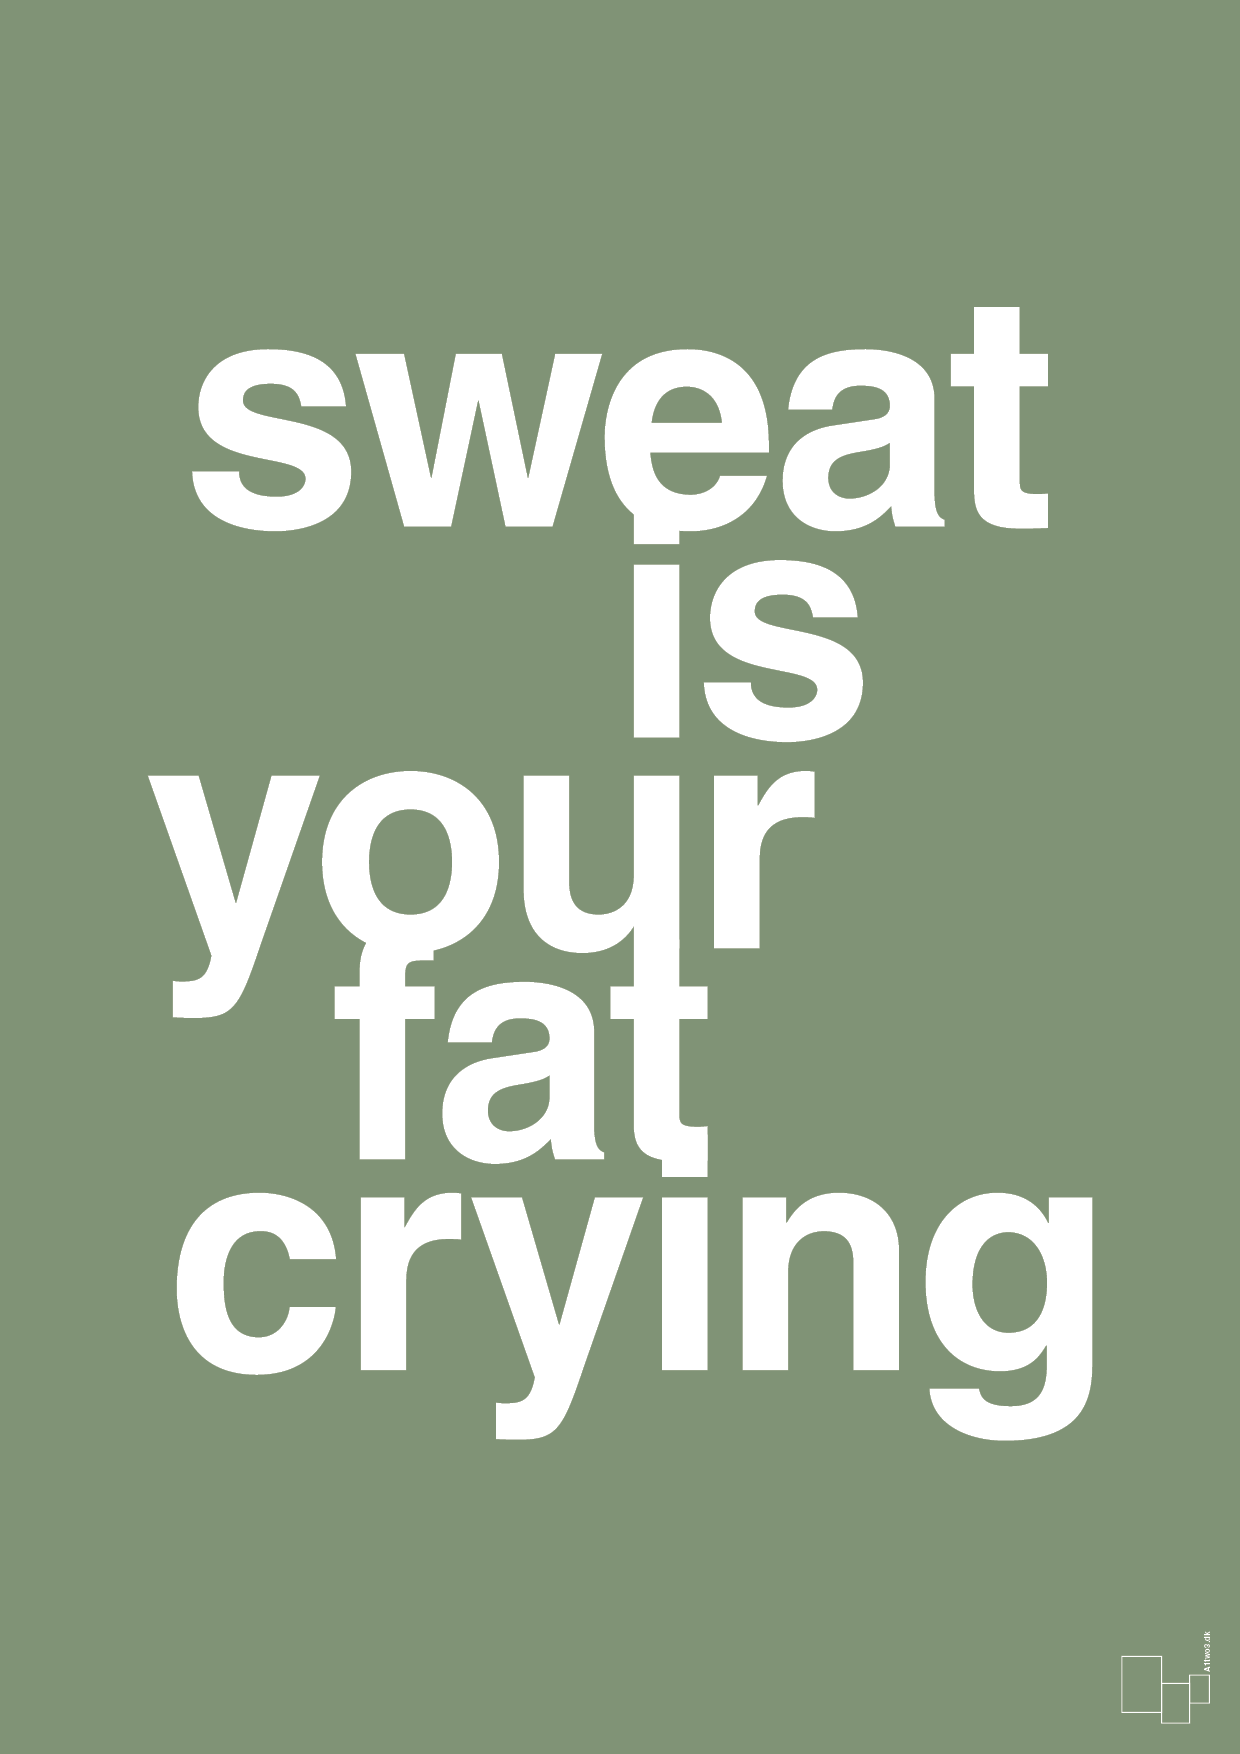 sweat is your fat crying - Plakat med Sport & Fritid i Jade